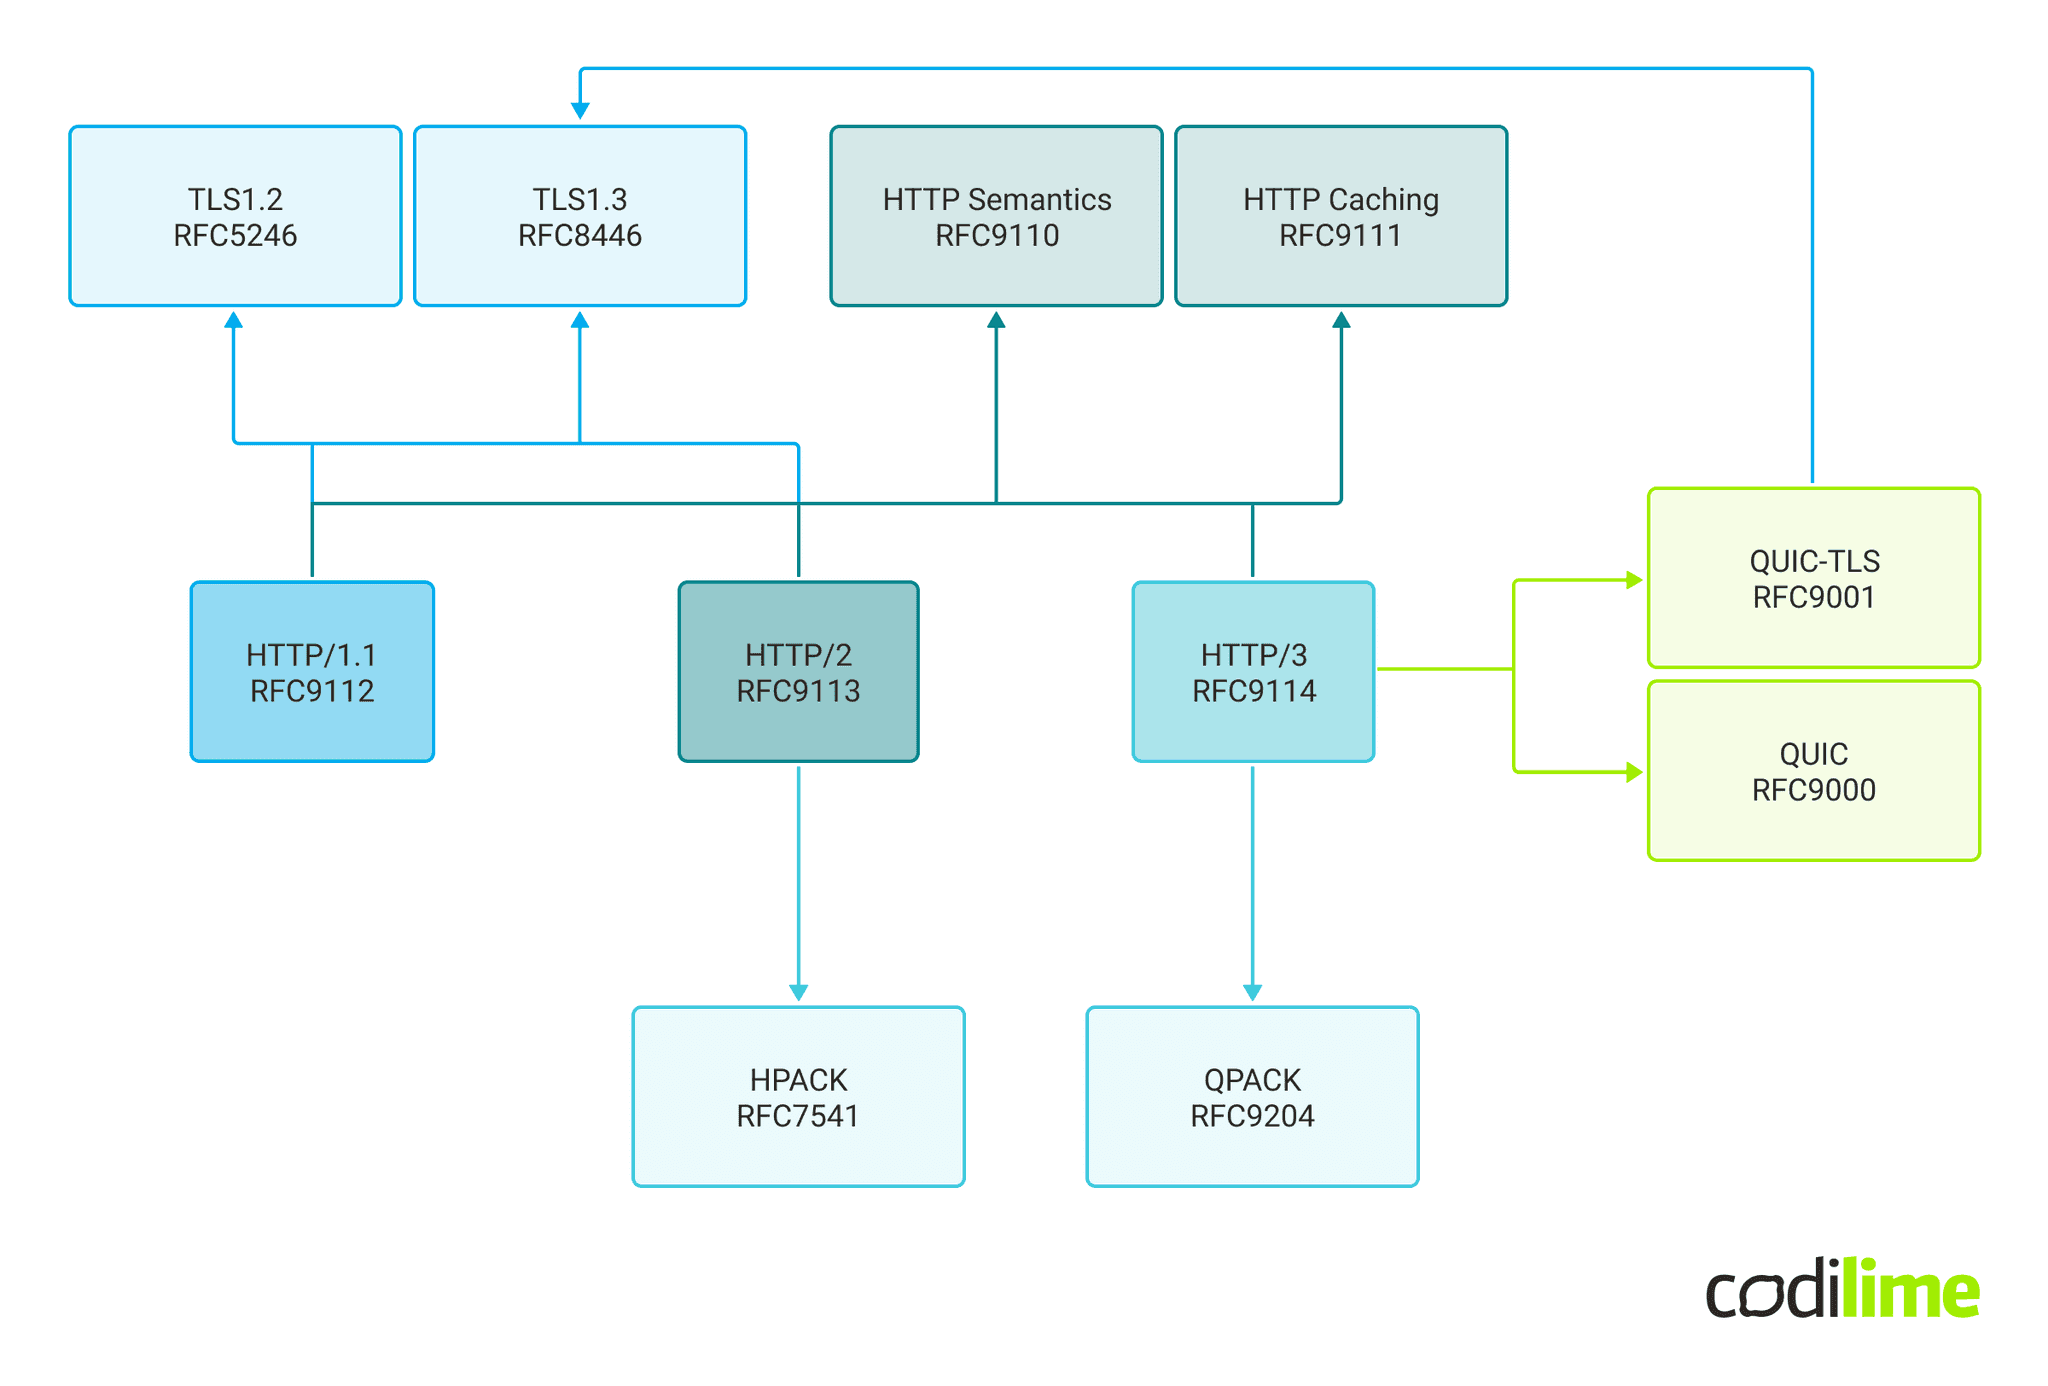  Structure of most important HTTP-related RFCs